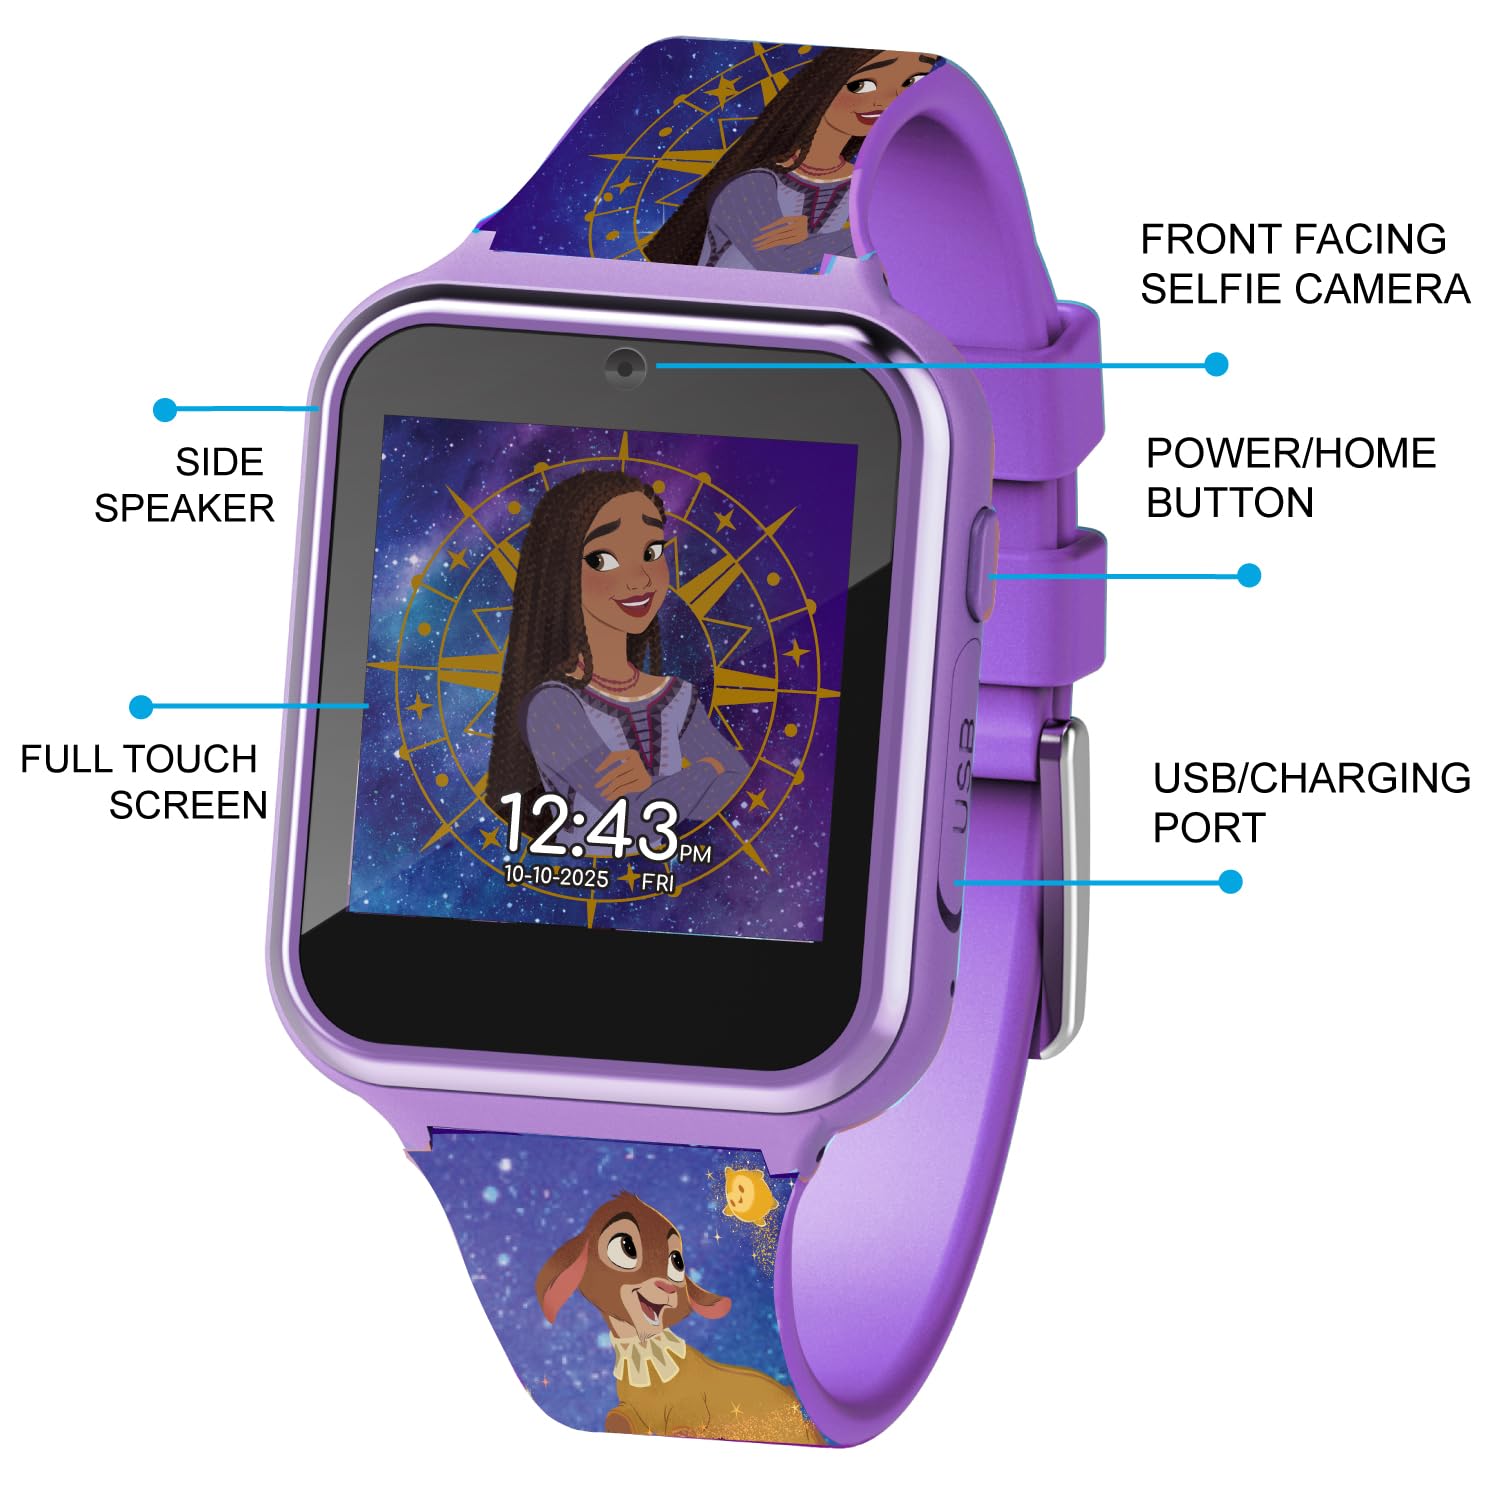 Accutime Disney Wish Purple Asha and Dahlia Educational Learning Touchscreen Smart Watch Toy for Girls, Boys, Toddlers - Selfie Cam, Learning Games, Calculator & More (Model: WSH4015AZ), 40mm